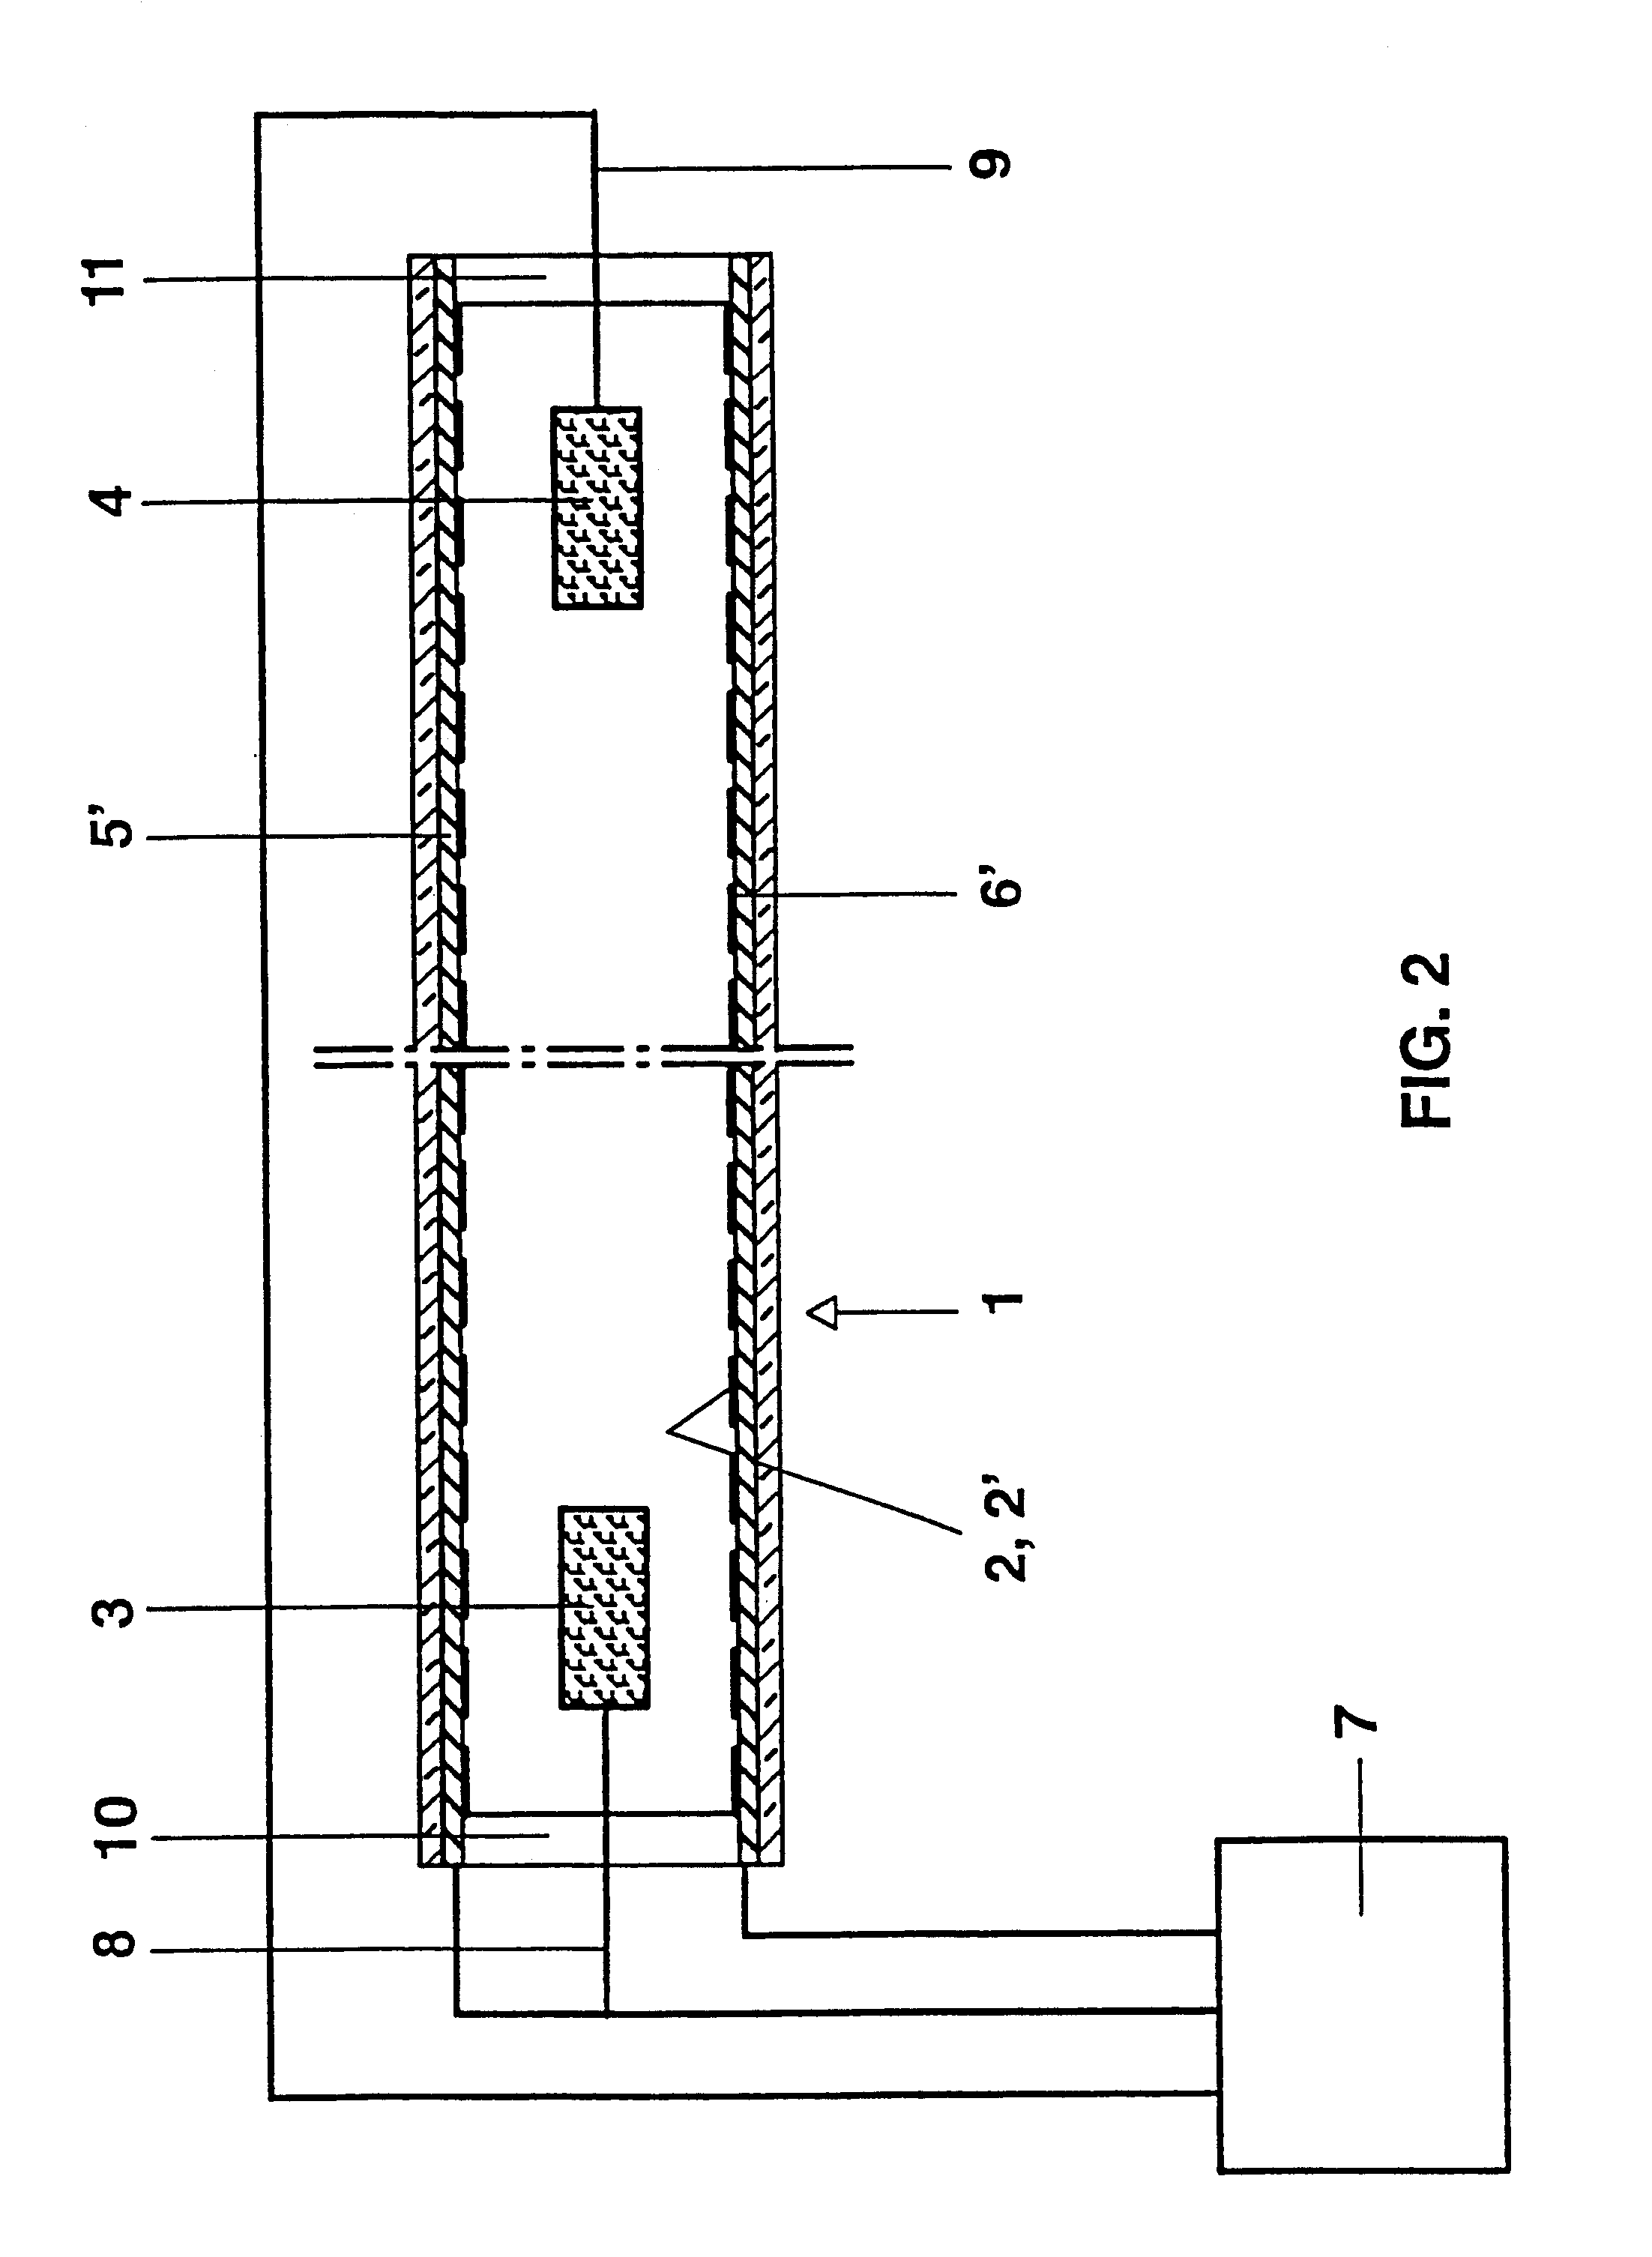 Method for operating a discharge lamp